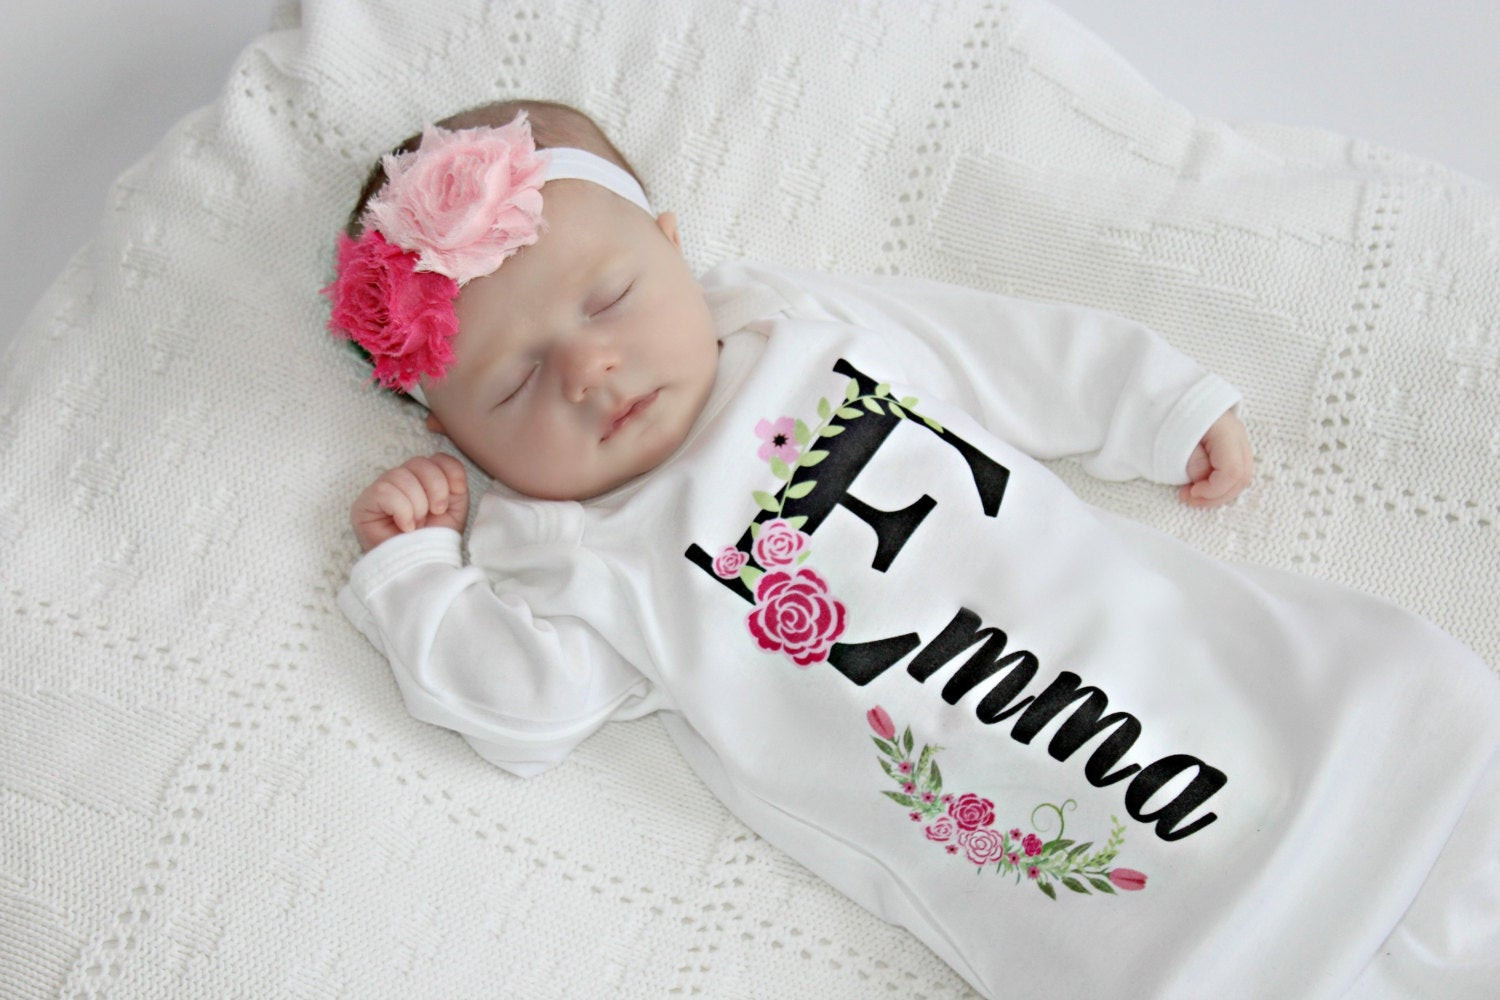 Personalized Baby Gift Etsy
 Personalized Baby Gift Girl Newborn Girl ing Home